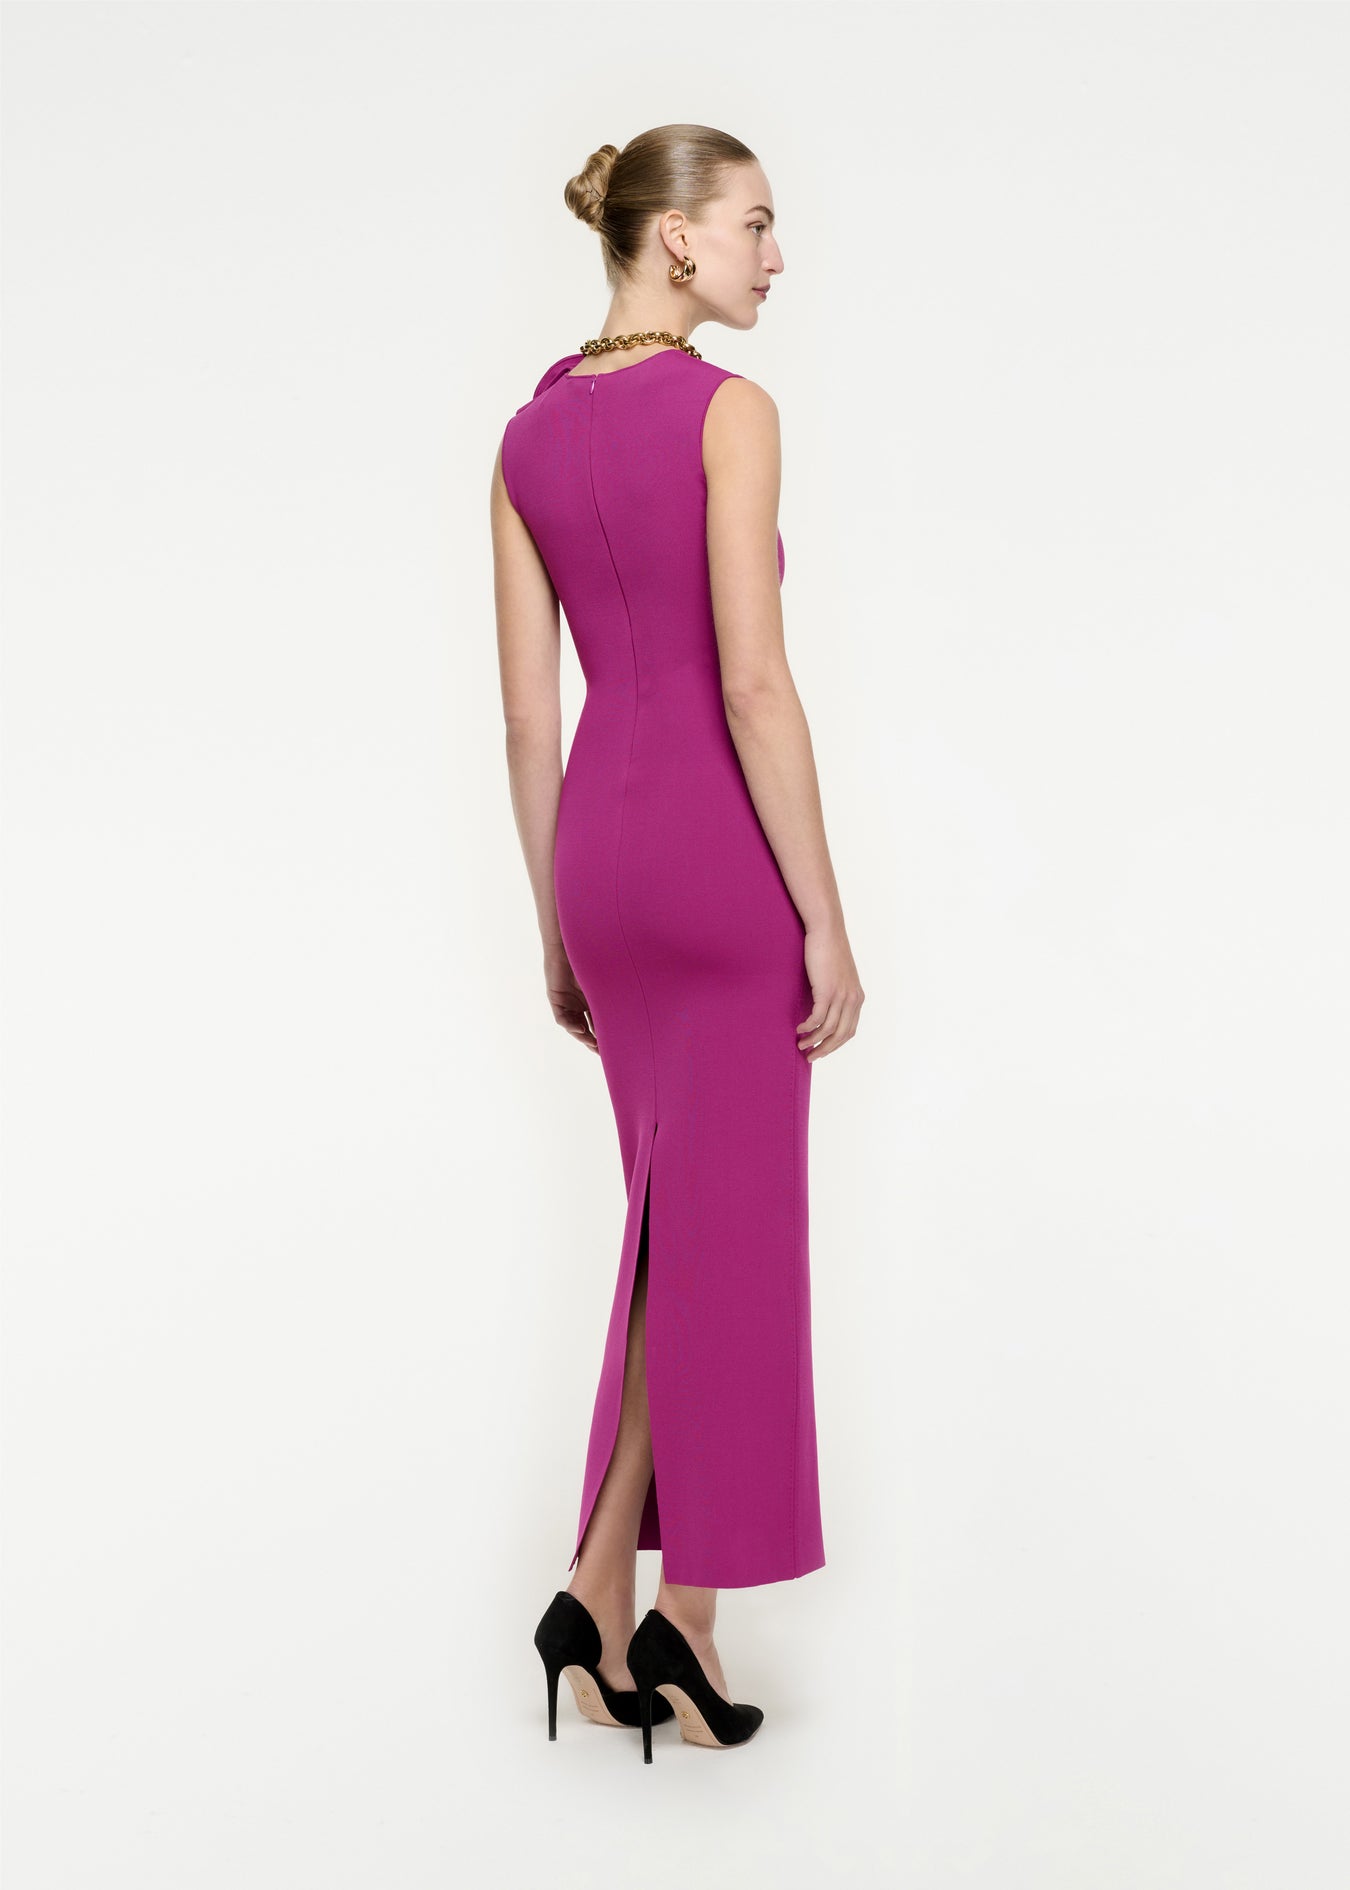 The back of a woman wearing the Knit Maxi Dress in Purple